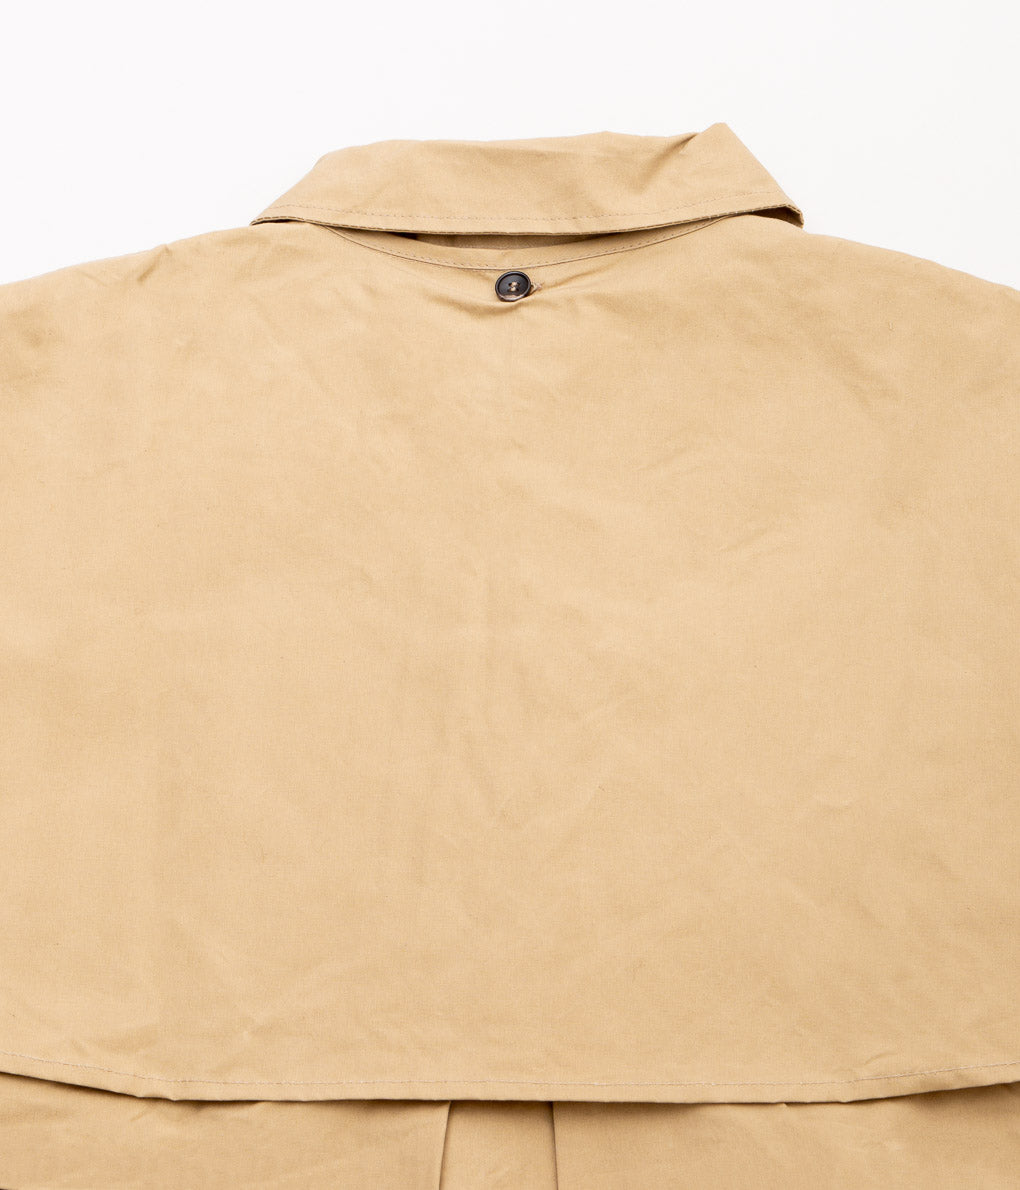 "Not photographed" CAWLEY "BRITISH DRY OILSKIN AlMA MAC" (BEIGE)